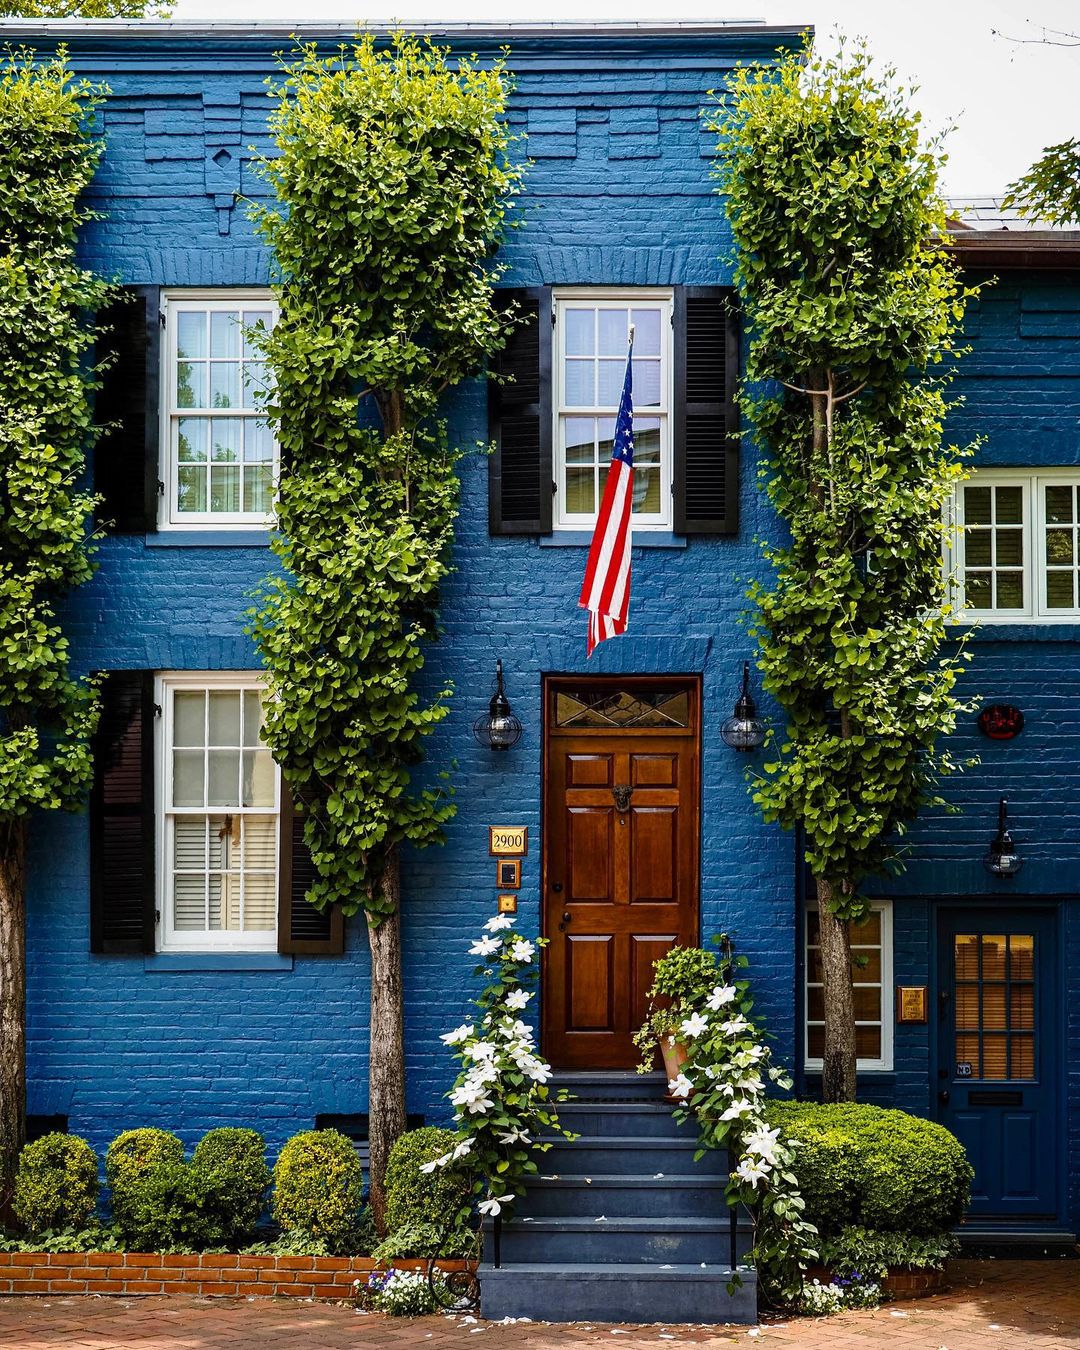 Home in Georgetown, Washington DC with blue brick interior, brown wooden door, and greenery. Photo by Instagram user @annabmartin